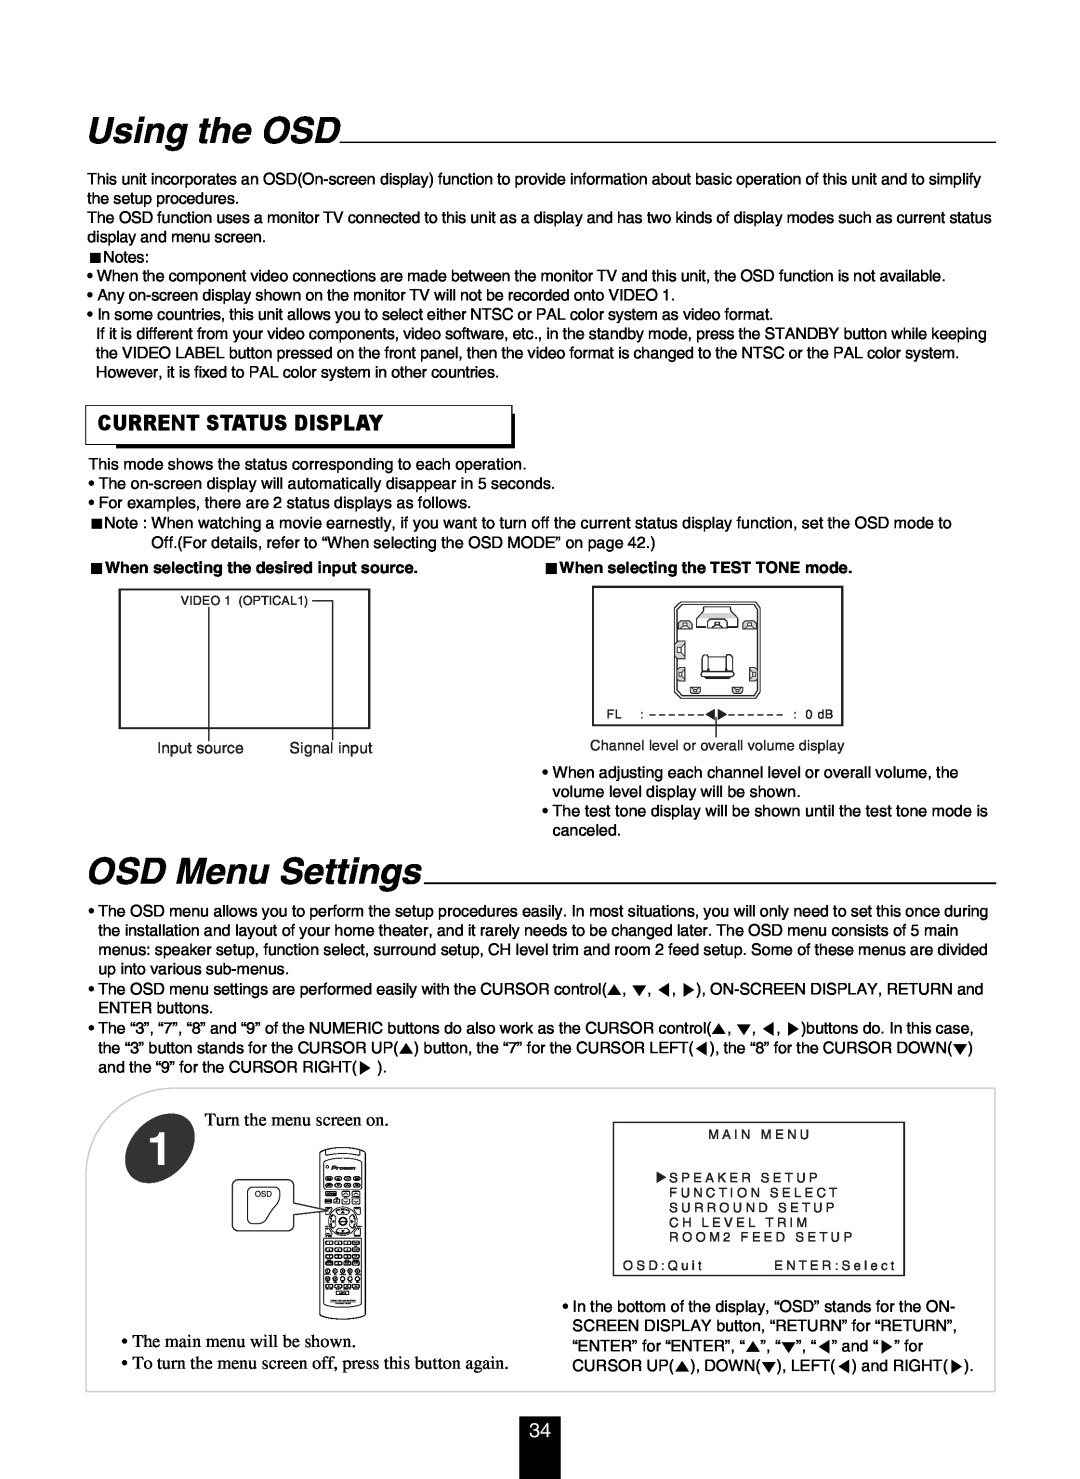 DTS RV4700 DTS-ES manual Using the OSD, OSD Menu Settings, Current Status Display, When selecting the desired input source 